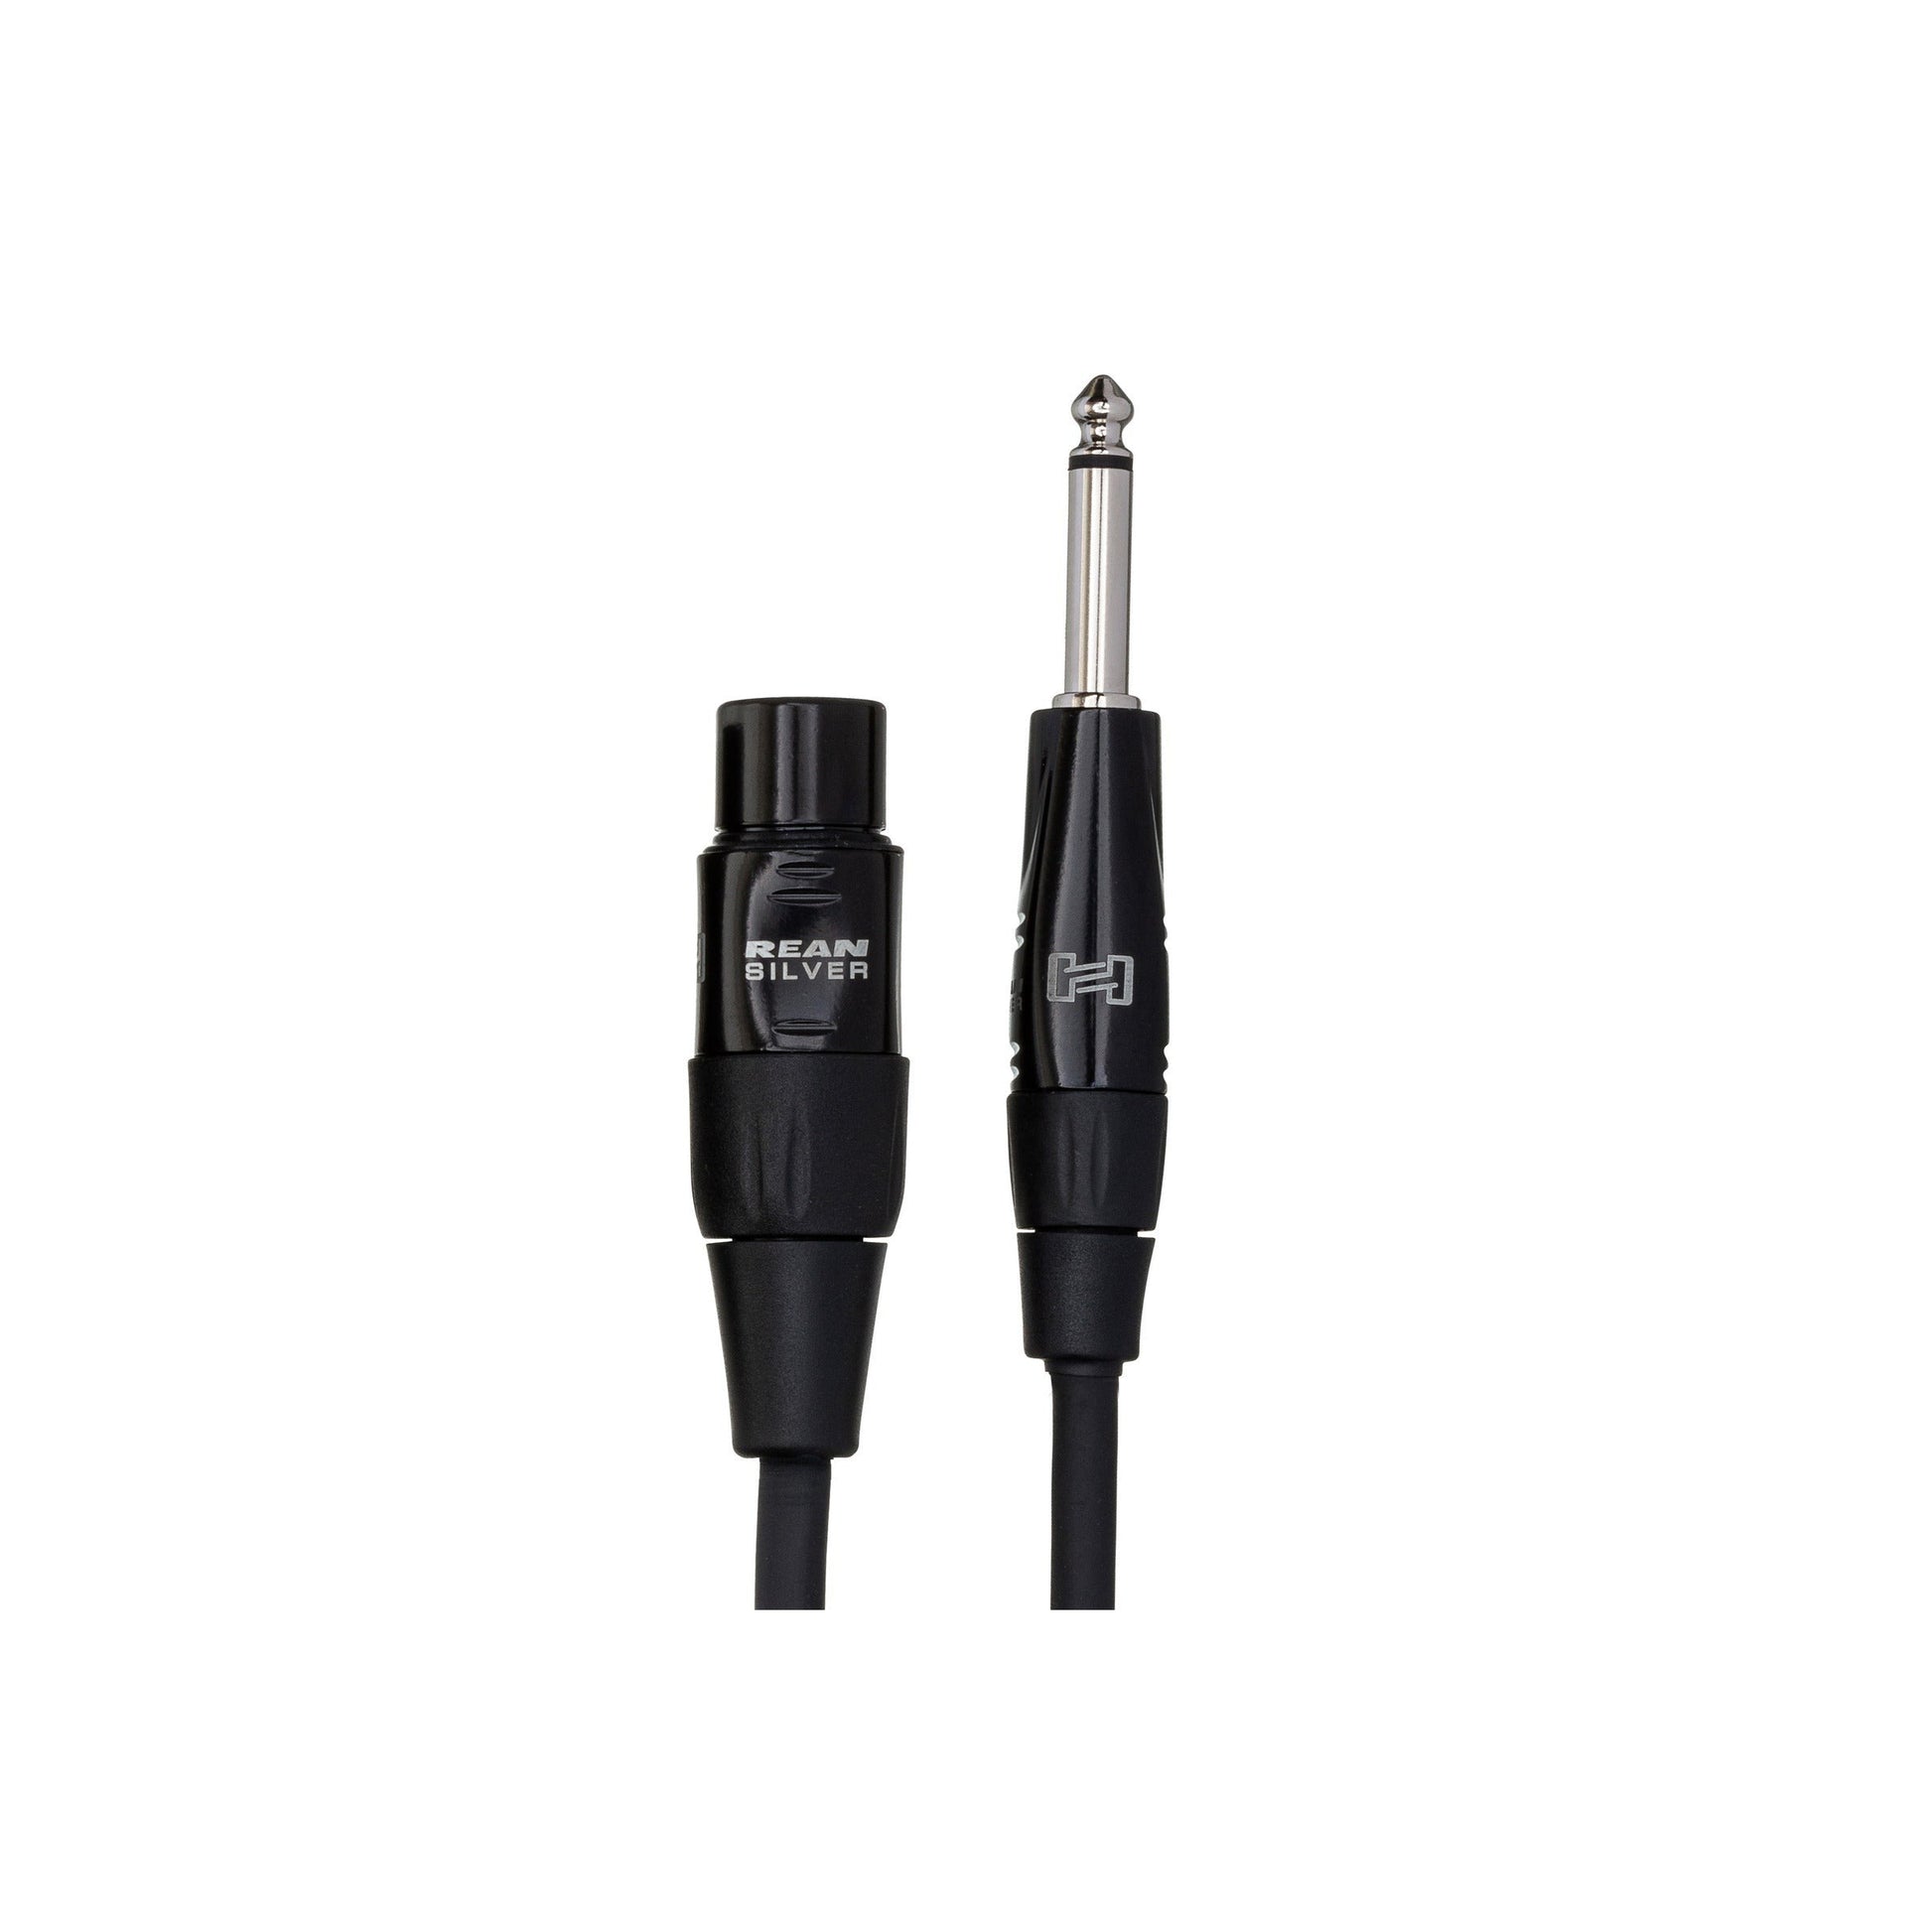 Dây Cáp Kết Nối Hosa Pro Microphone Cable, REAN 1/4 In TS - XLR3F - Việt Music